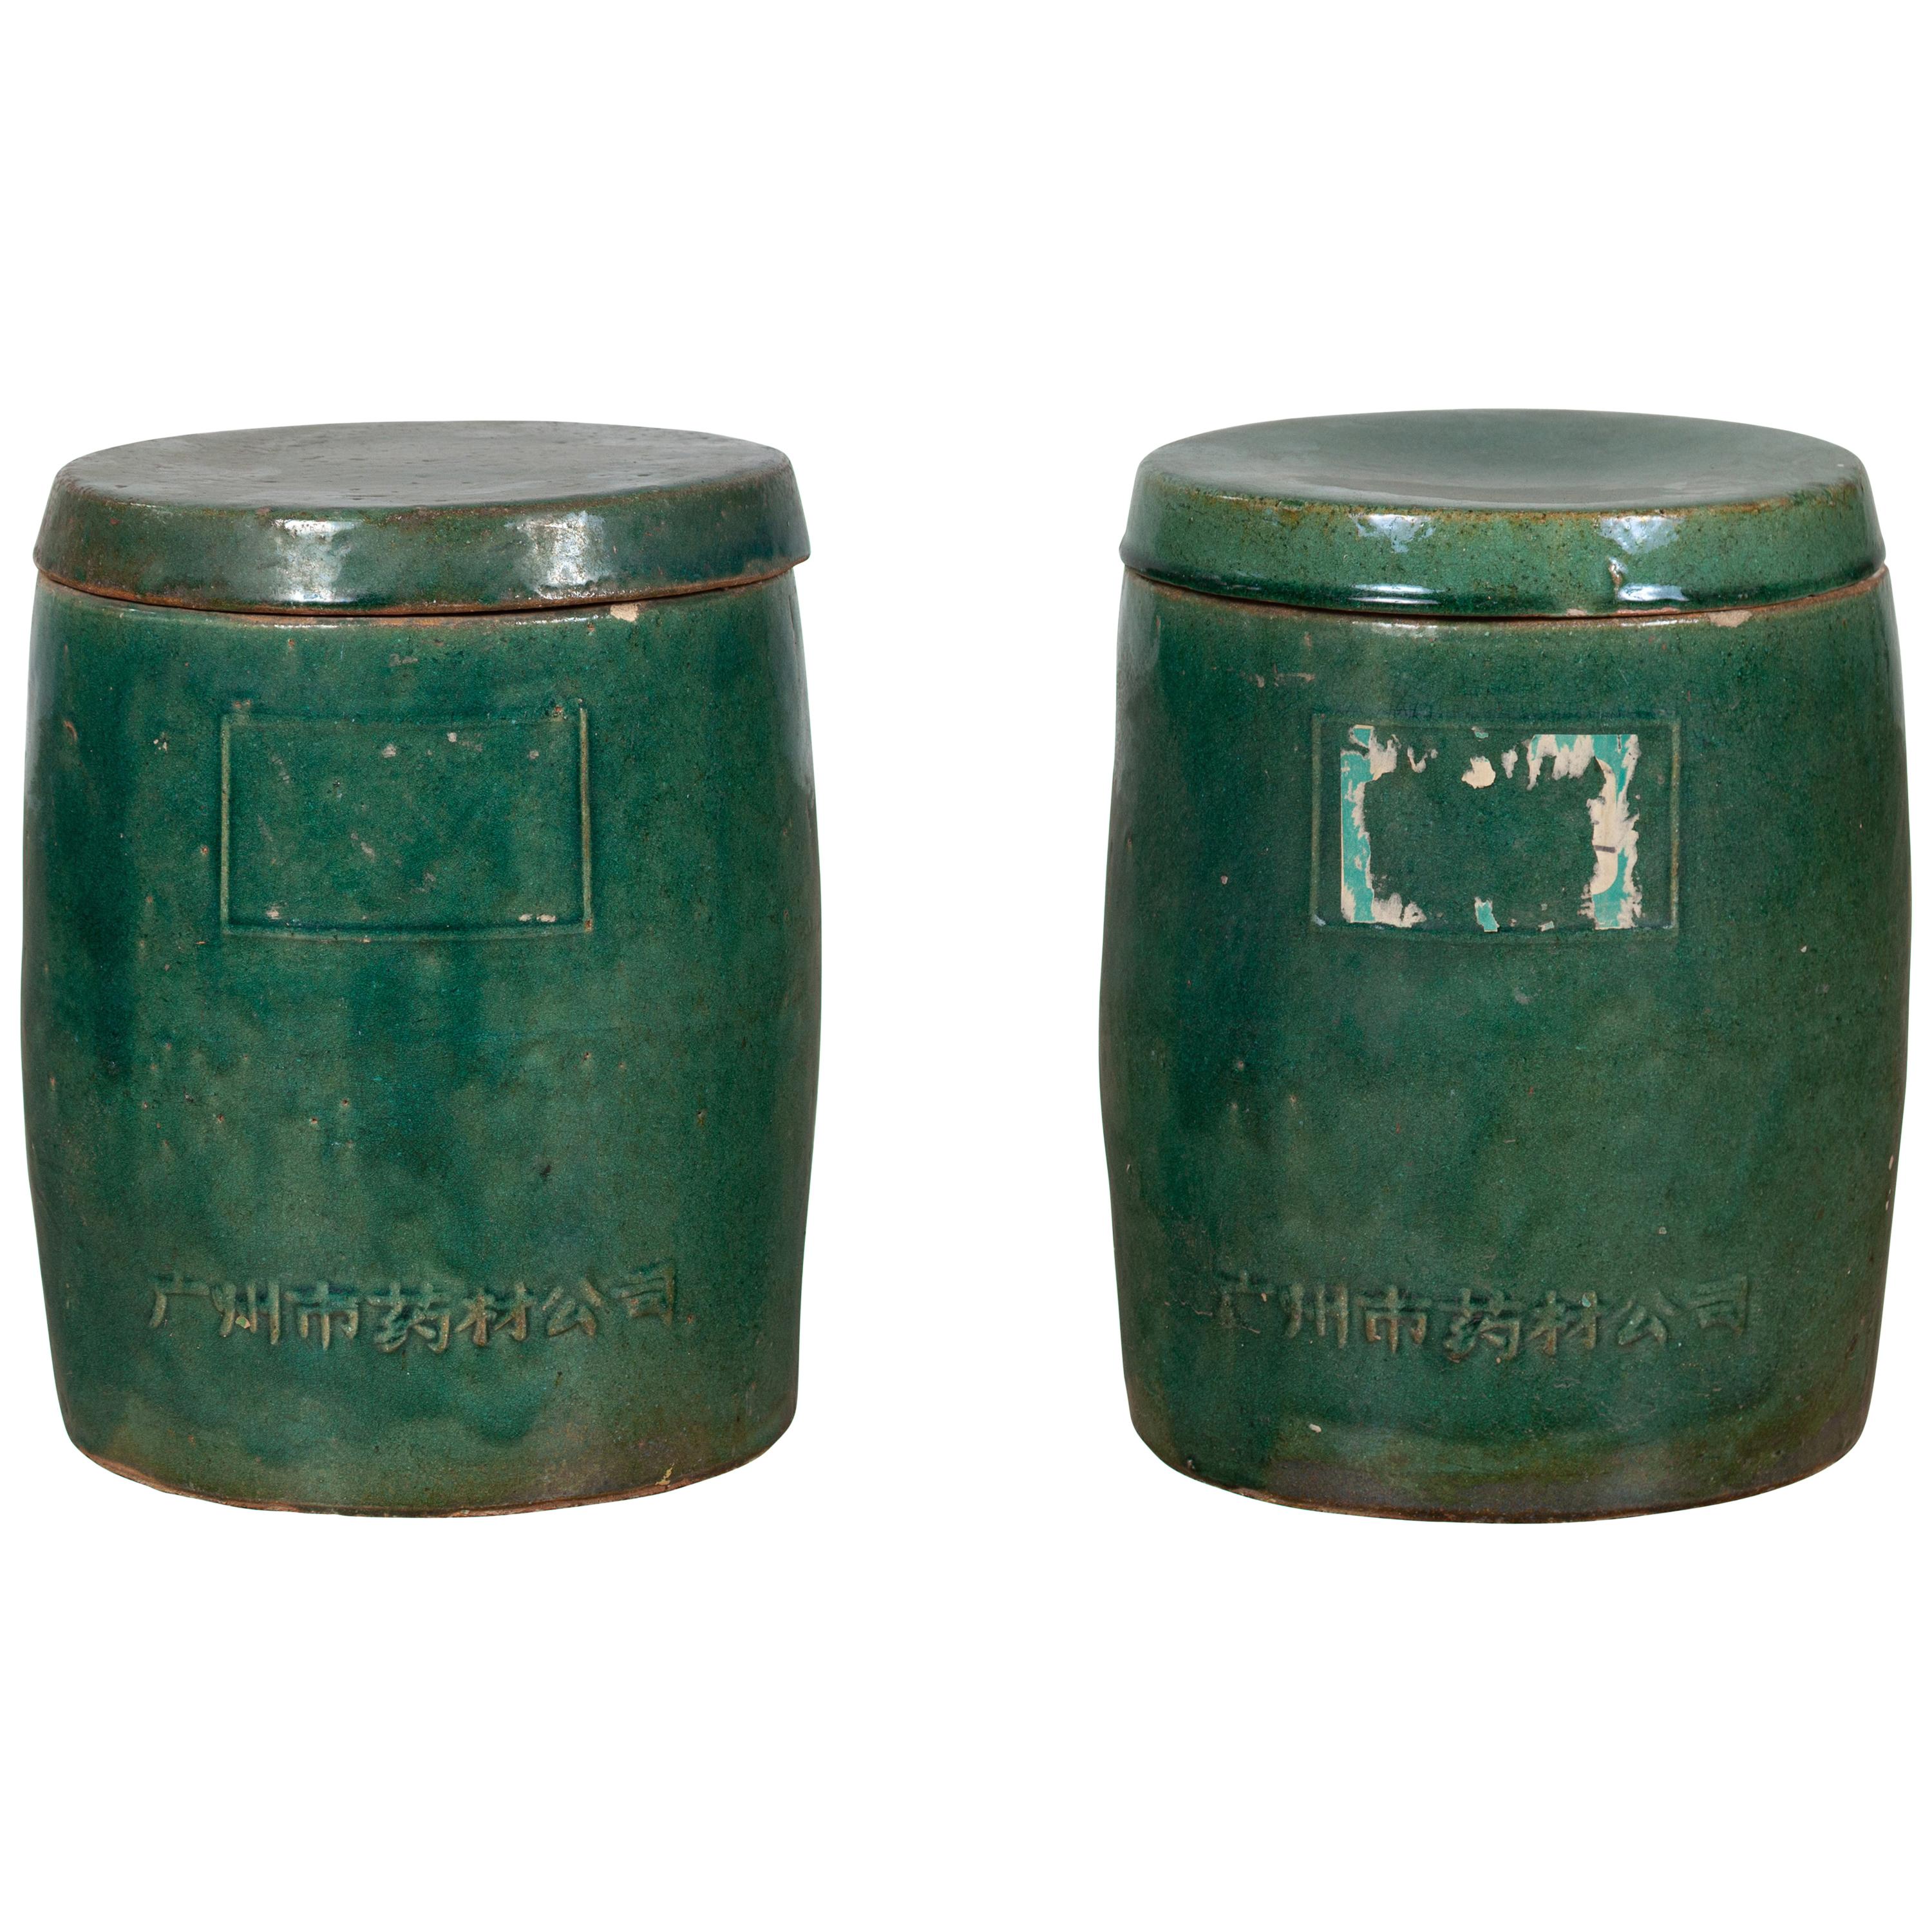 Pair of Antique Chinese Green Glazed Ceramic Lidded Jars from the Hunan Province